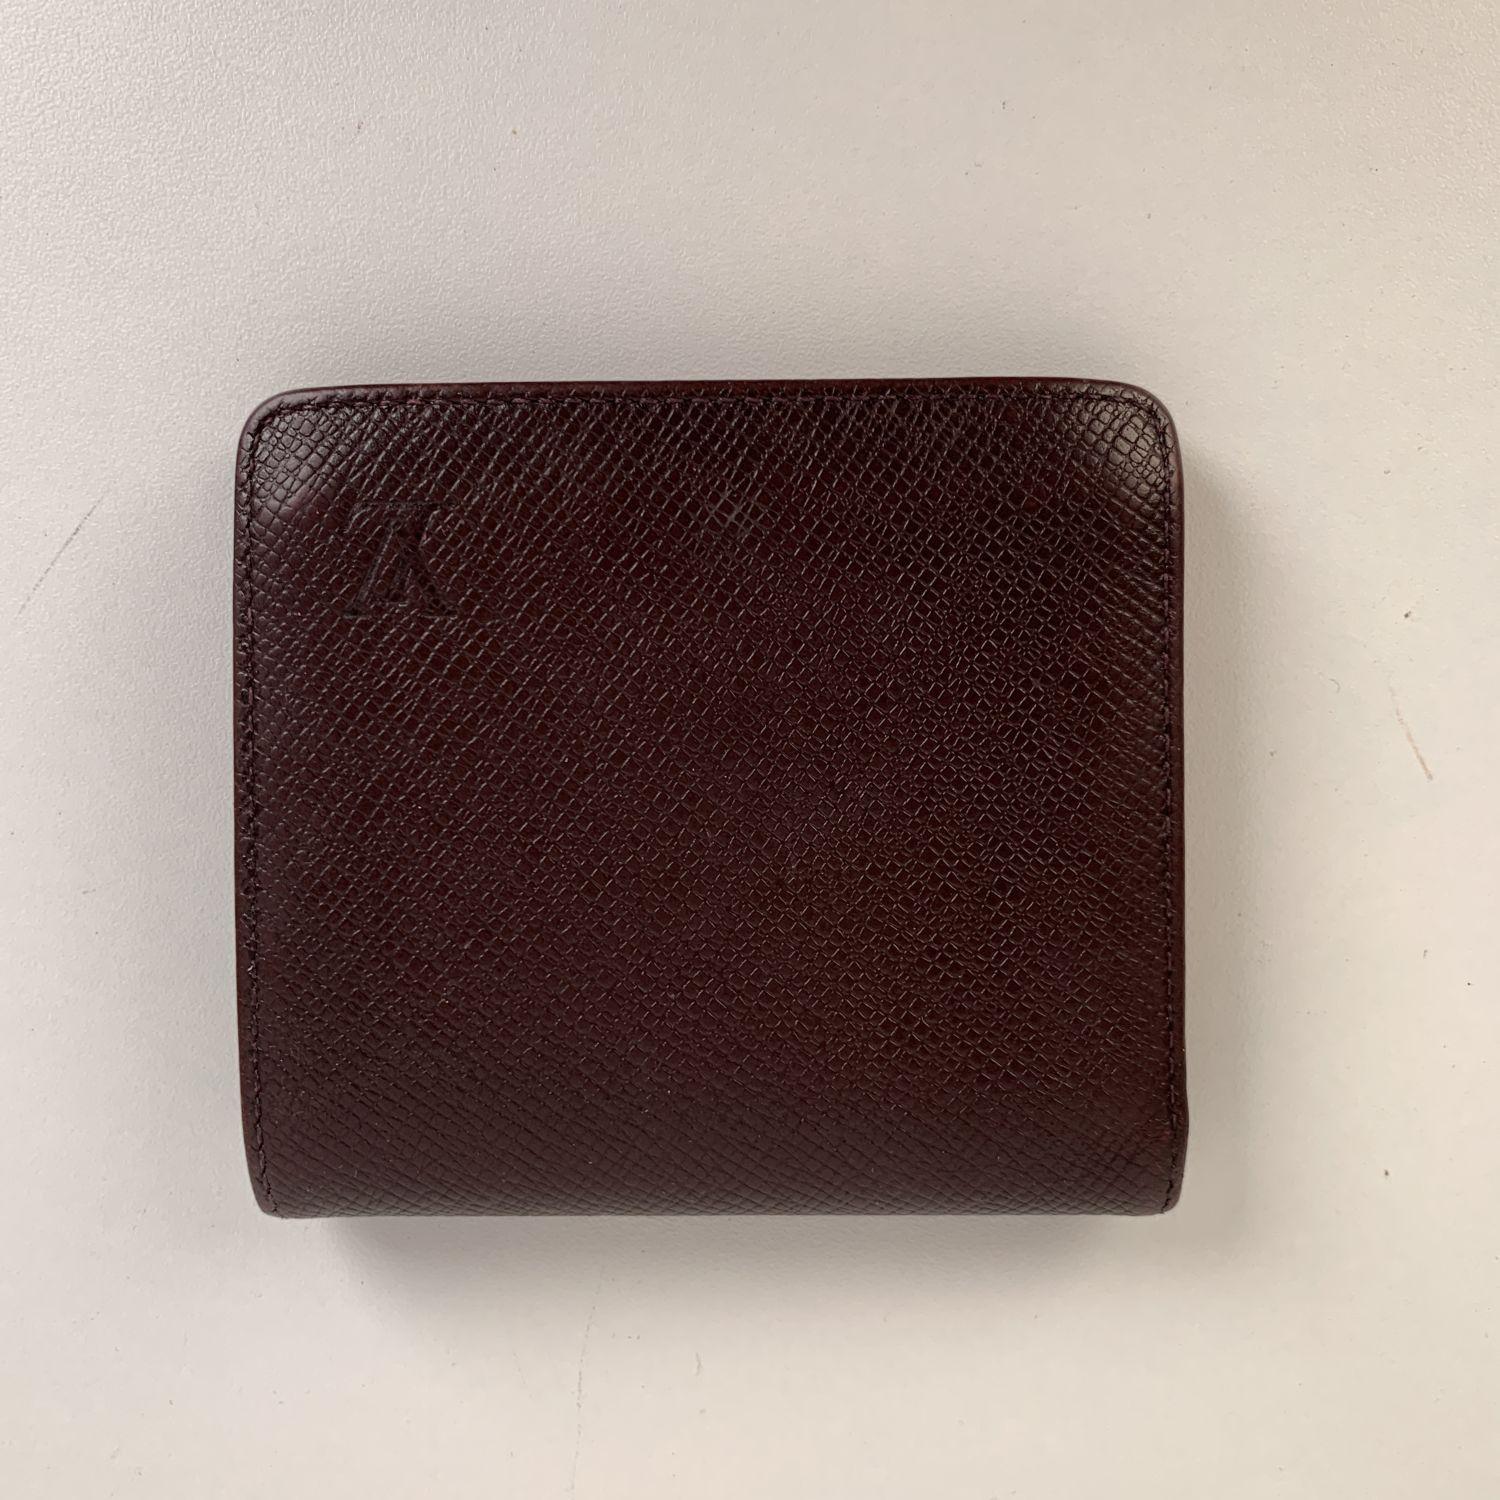 Louis Vuitton brown taiga leather 'Porte Billets 3 Cartes' bifold wallet. LV - LOUIS VUITTON monogram engraved on leather on the front. LOUIS VUITTON Paris - made in France' embossed inside. 3 credit card slots, 1 bill compartment , 1 coin